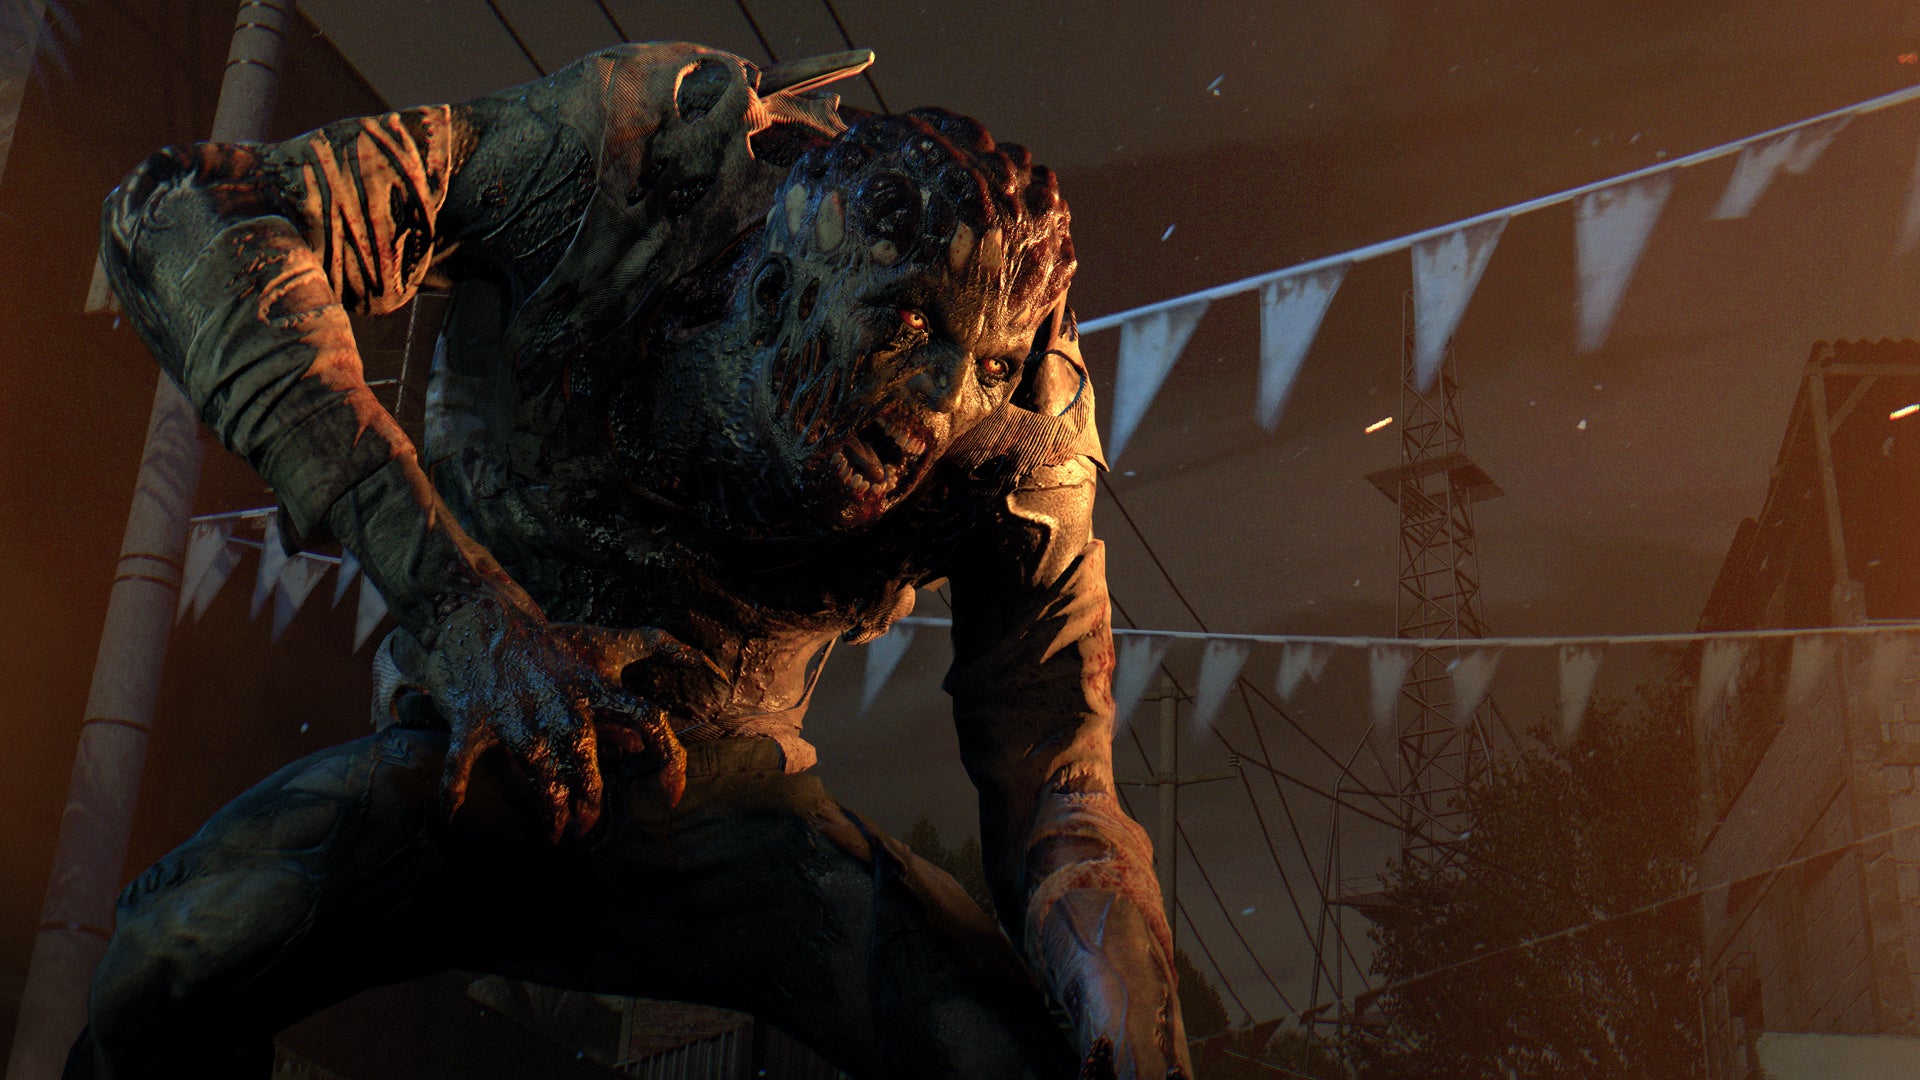 Techniques to use as a Night Hunter in Dying Light showcased video |